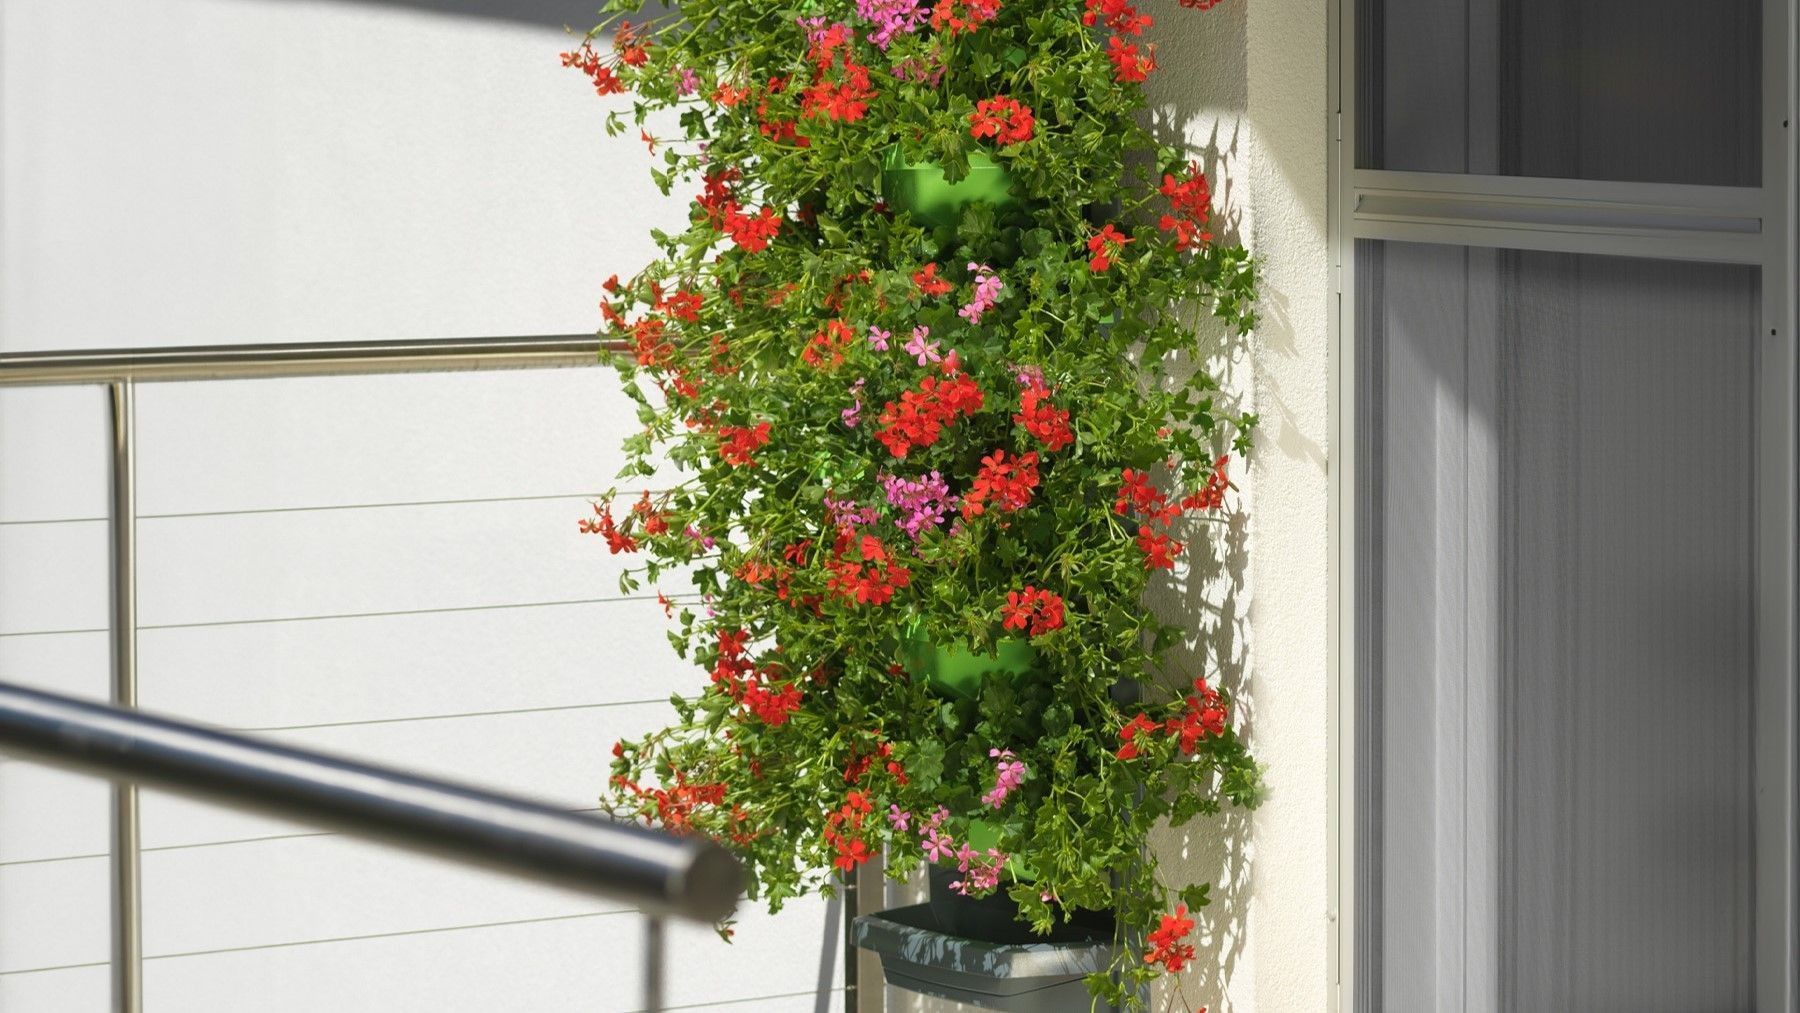 Flowers in the vertical garden on the balcony